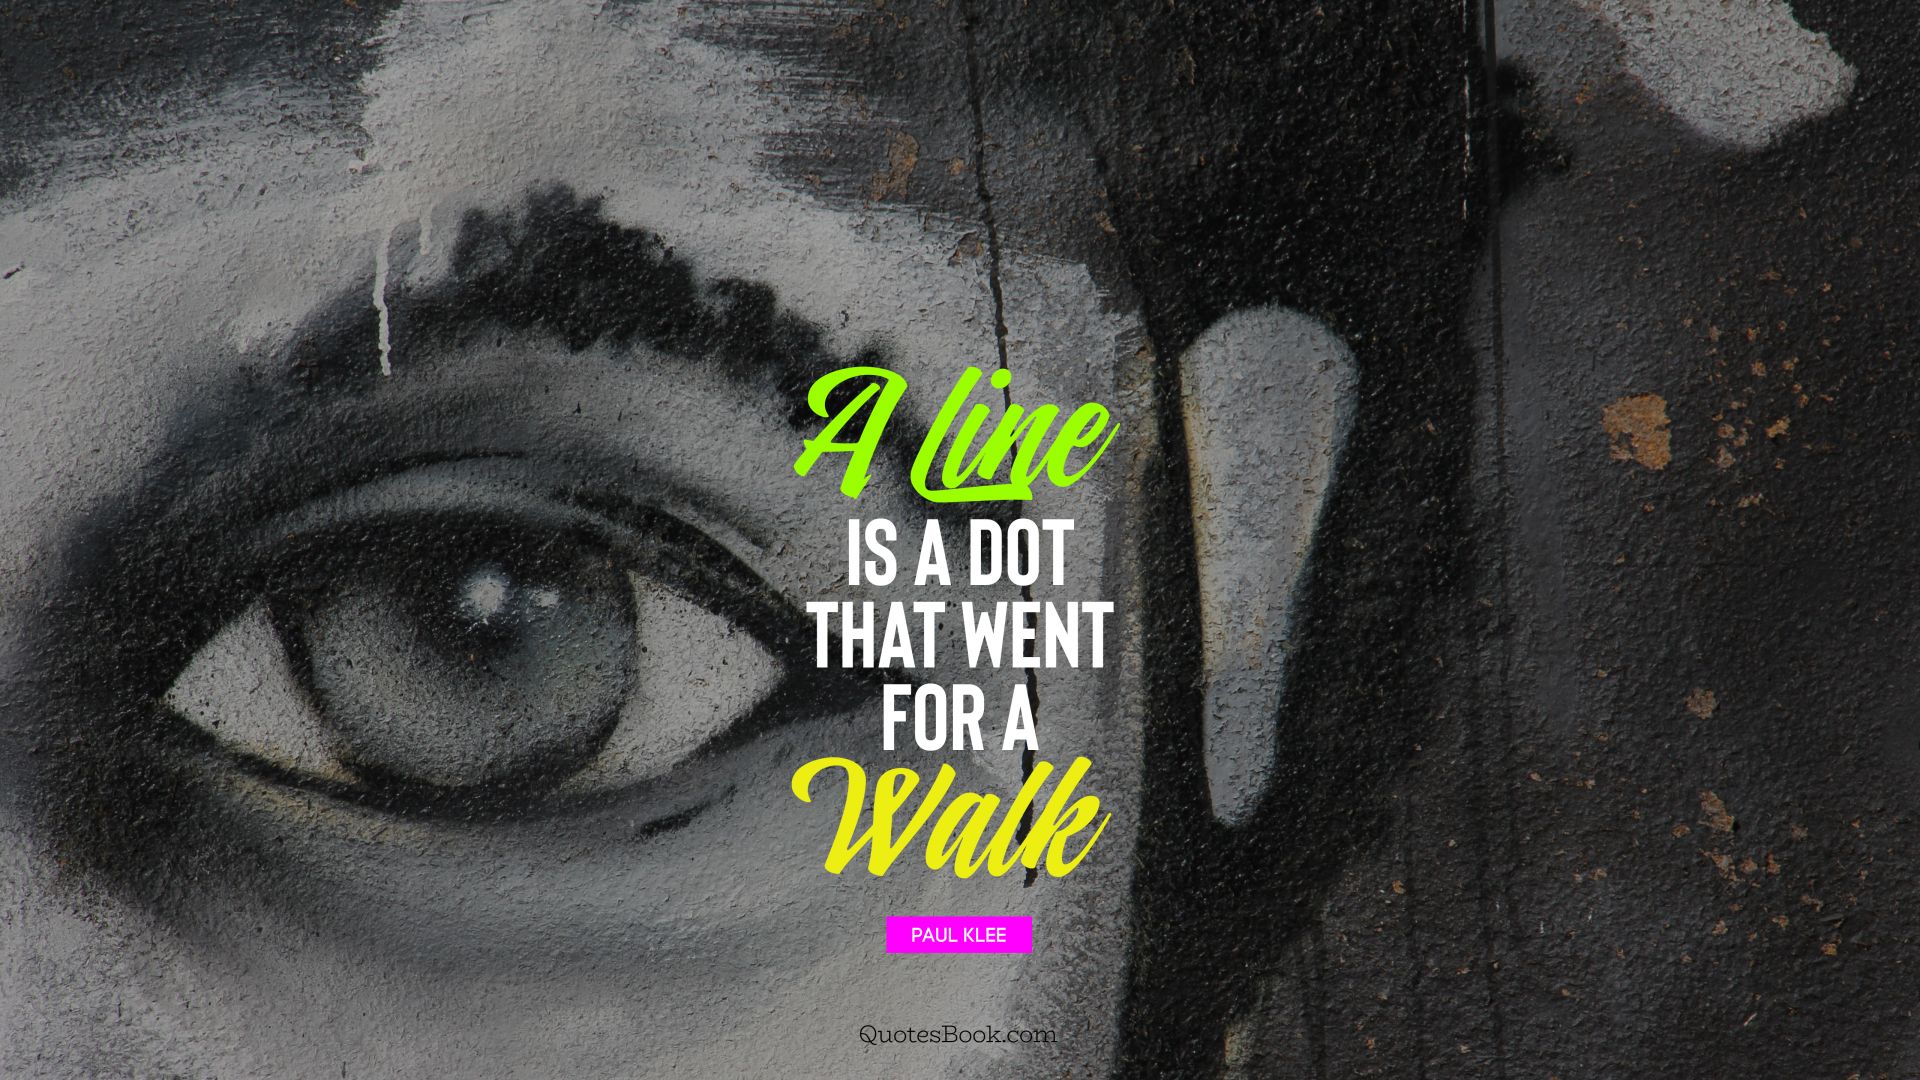 A line is a dot that went for a walk. - Quote by Paul Klee